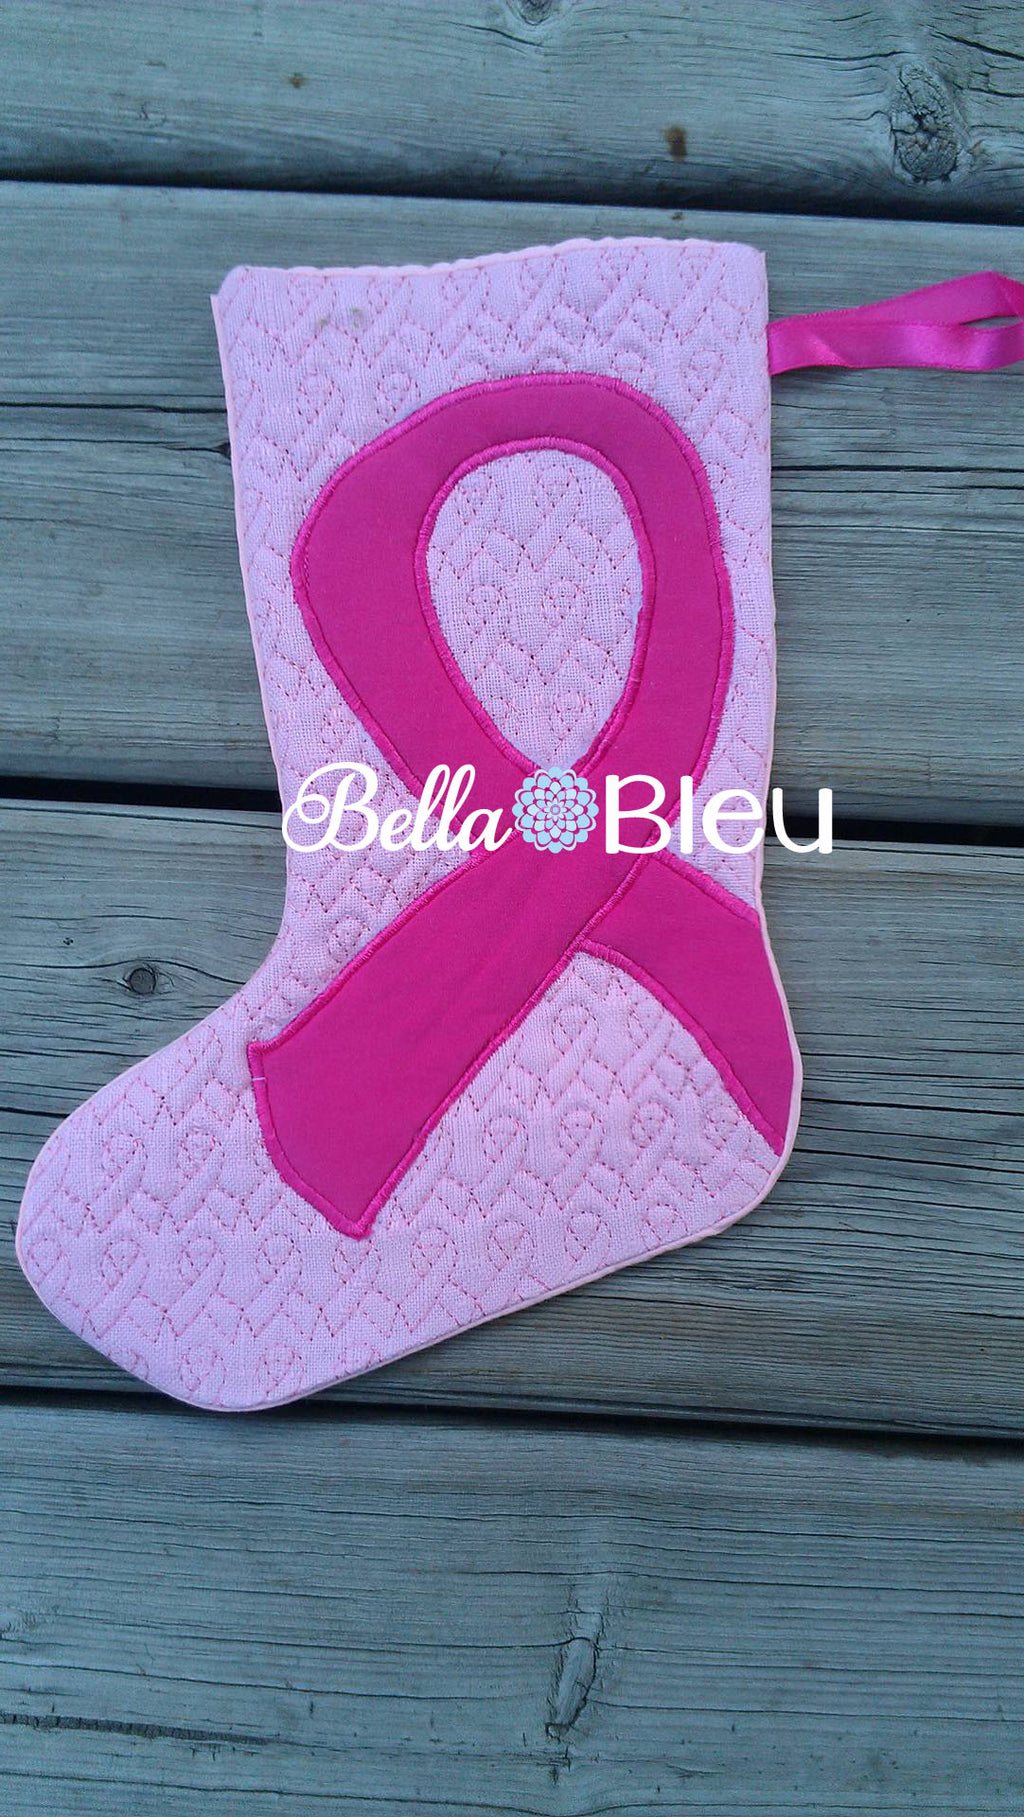 BBE - ITH Ribbon Awareness Christmas Stocking, In The Hoop - 3 Sizes!